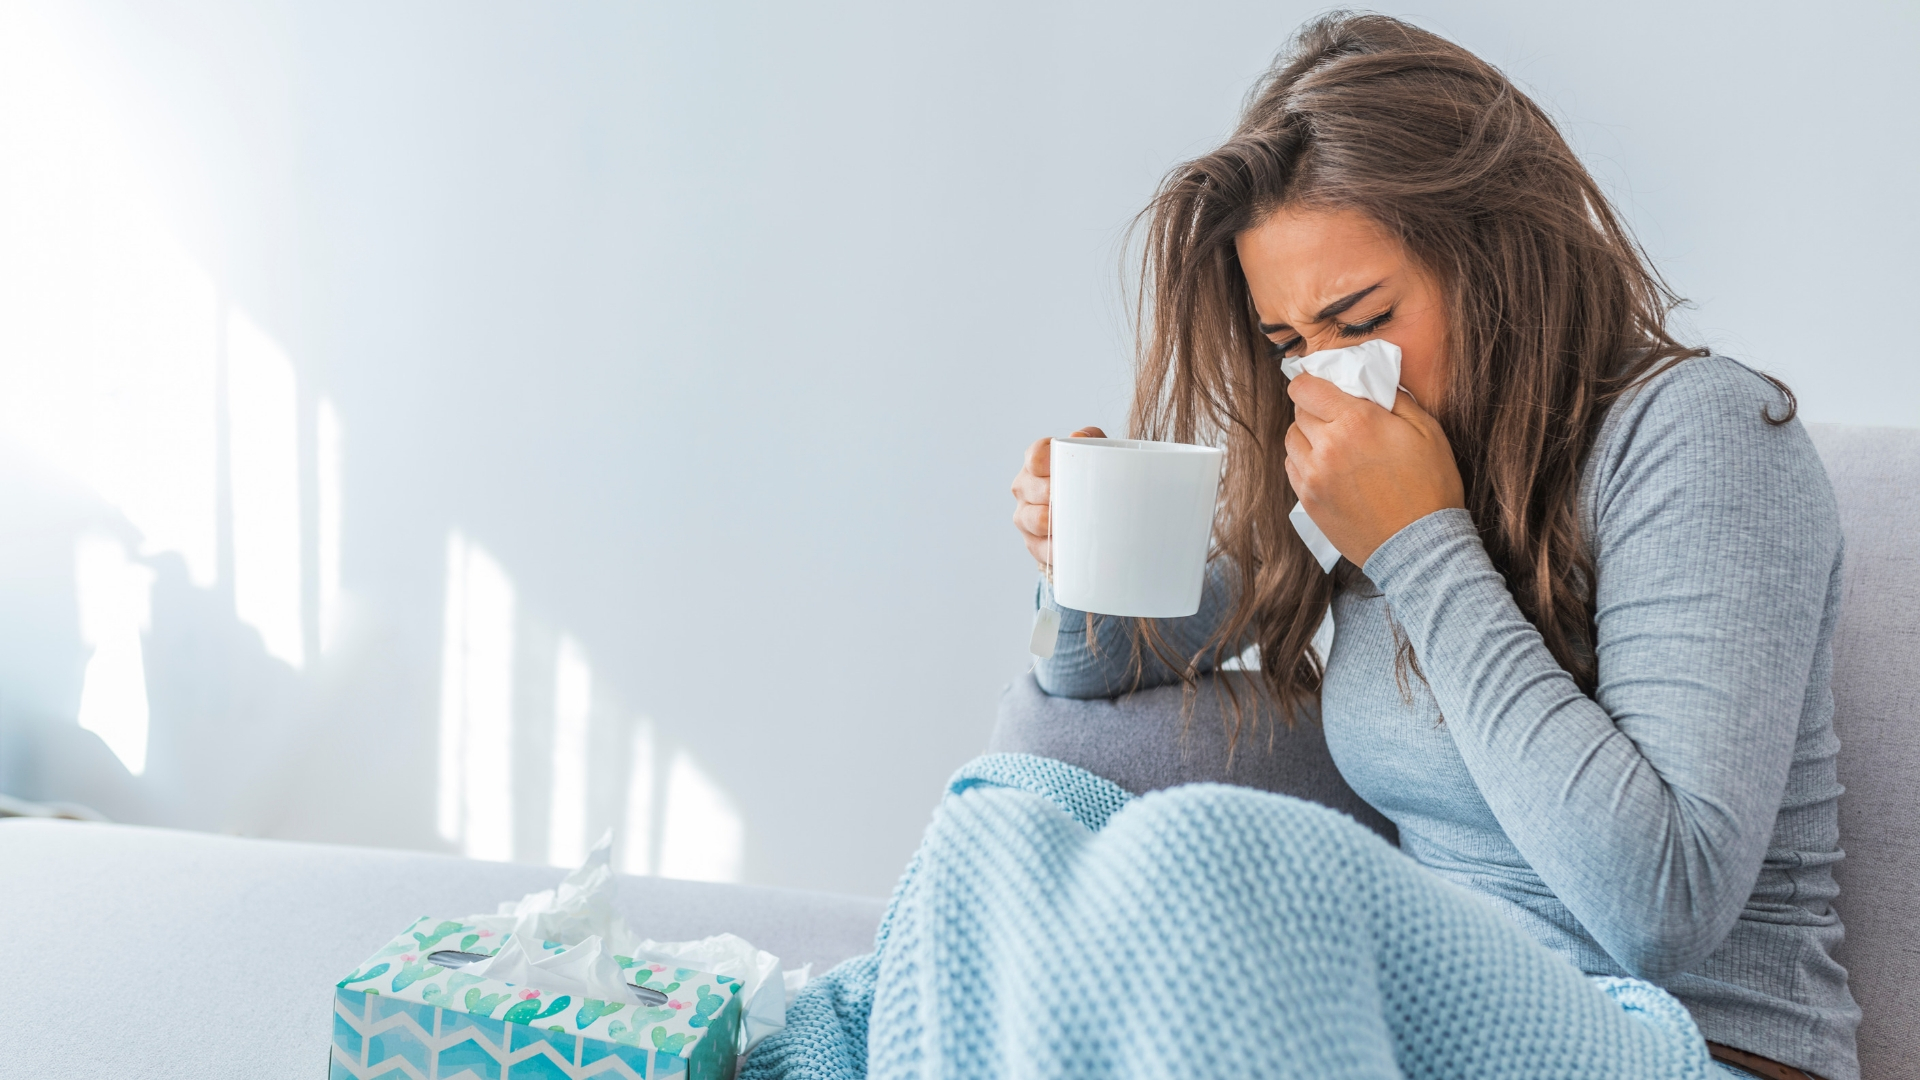 5 Natural Ways to Beat Cold and Flu + FREE Course!